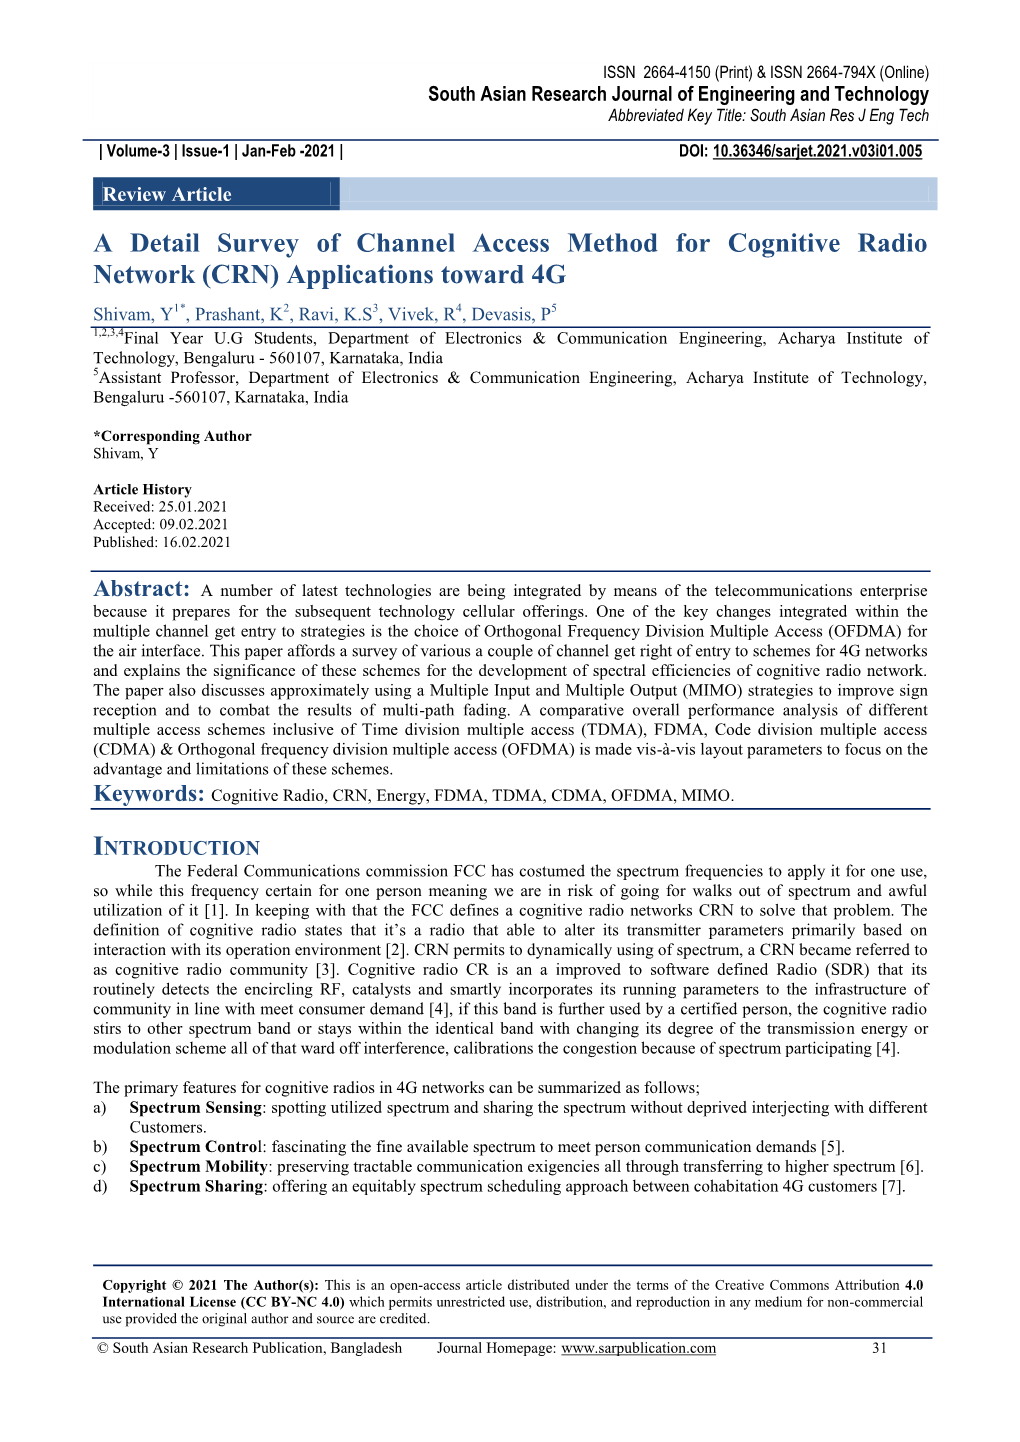 A Detail Survey of Channel Access Method for Cognitive Radio Network (CRN) Applications Toward 4G